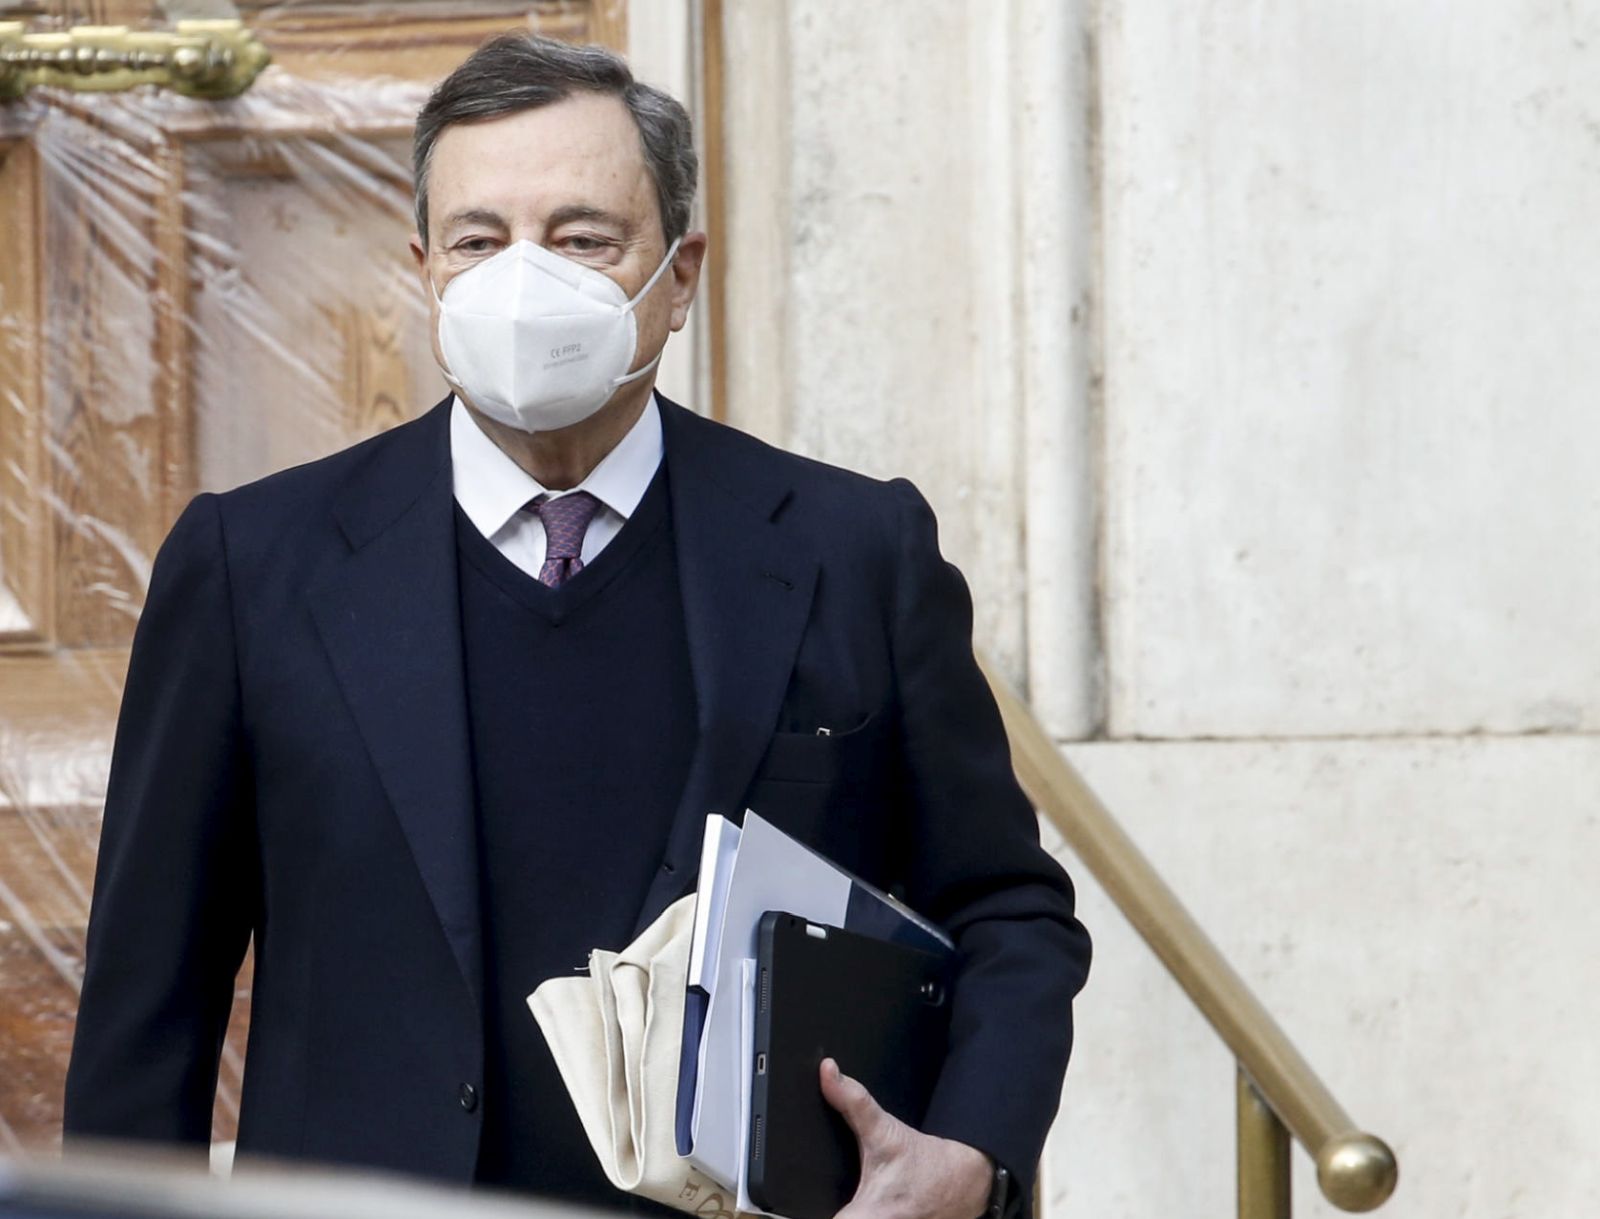 epa08981663 Mario Draghi, former president of the European Central Bank (ECB), leaves his home in Rome, Italy, 02 February 2021. According to media reports quoting party sources, the Italia Viva (IV) party, which pulled out of the ruling coalition leading to the collaplse of Giuseppe Conte's government, would like to see Draghi become prime minister.  EPA/FABIO FRUSTACI